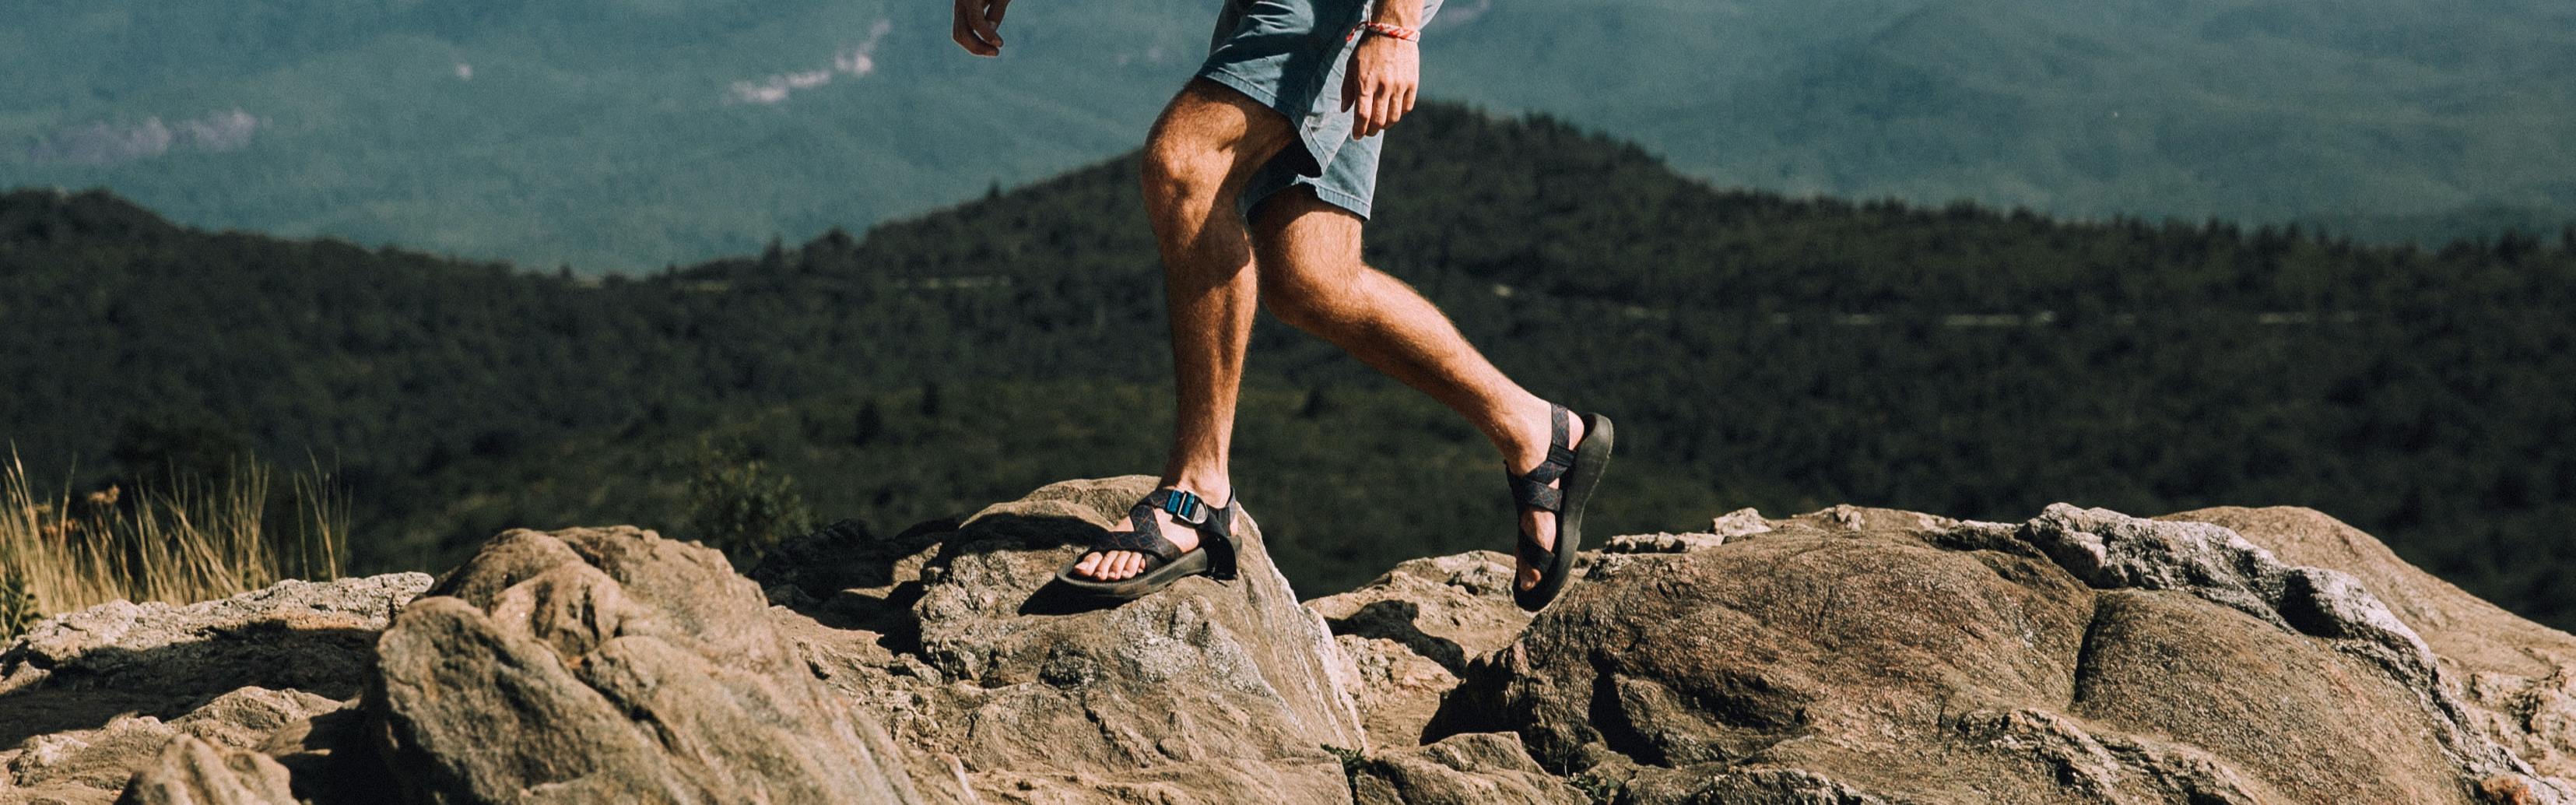 A man in sandals hikes on a rocky ridgeline.